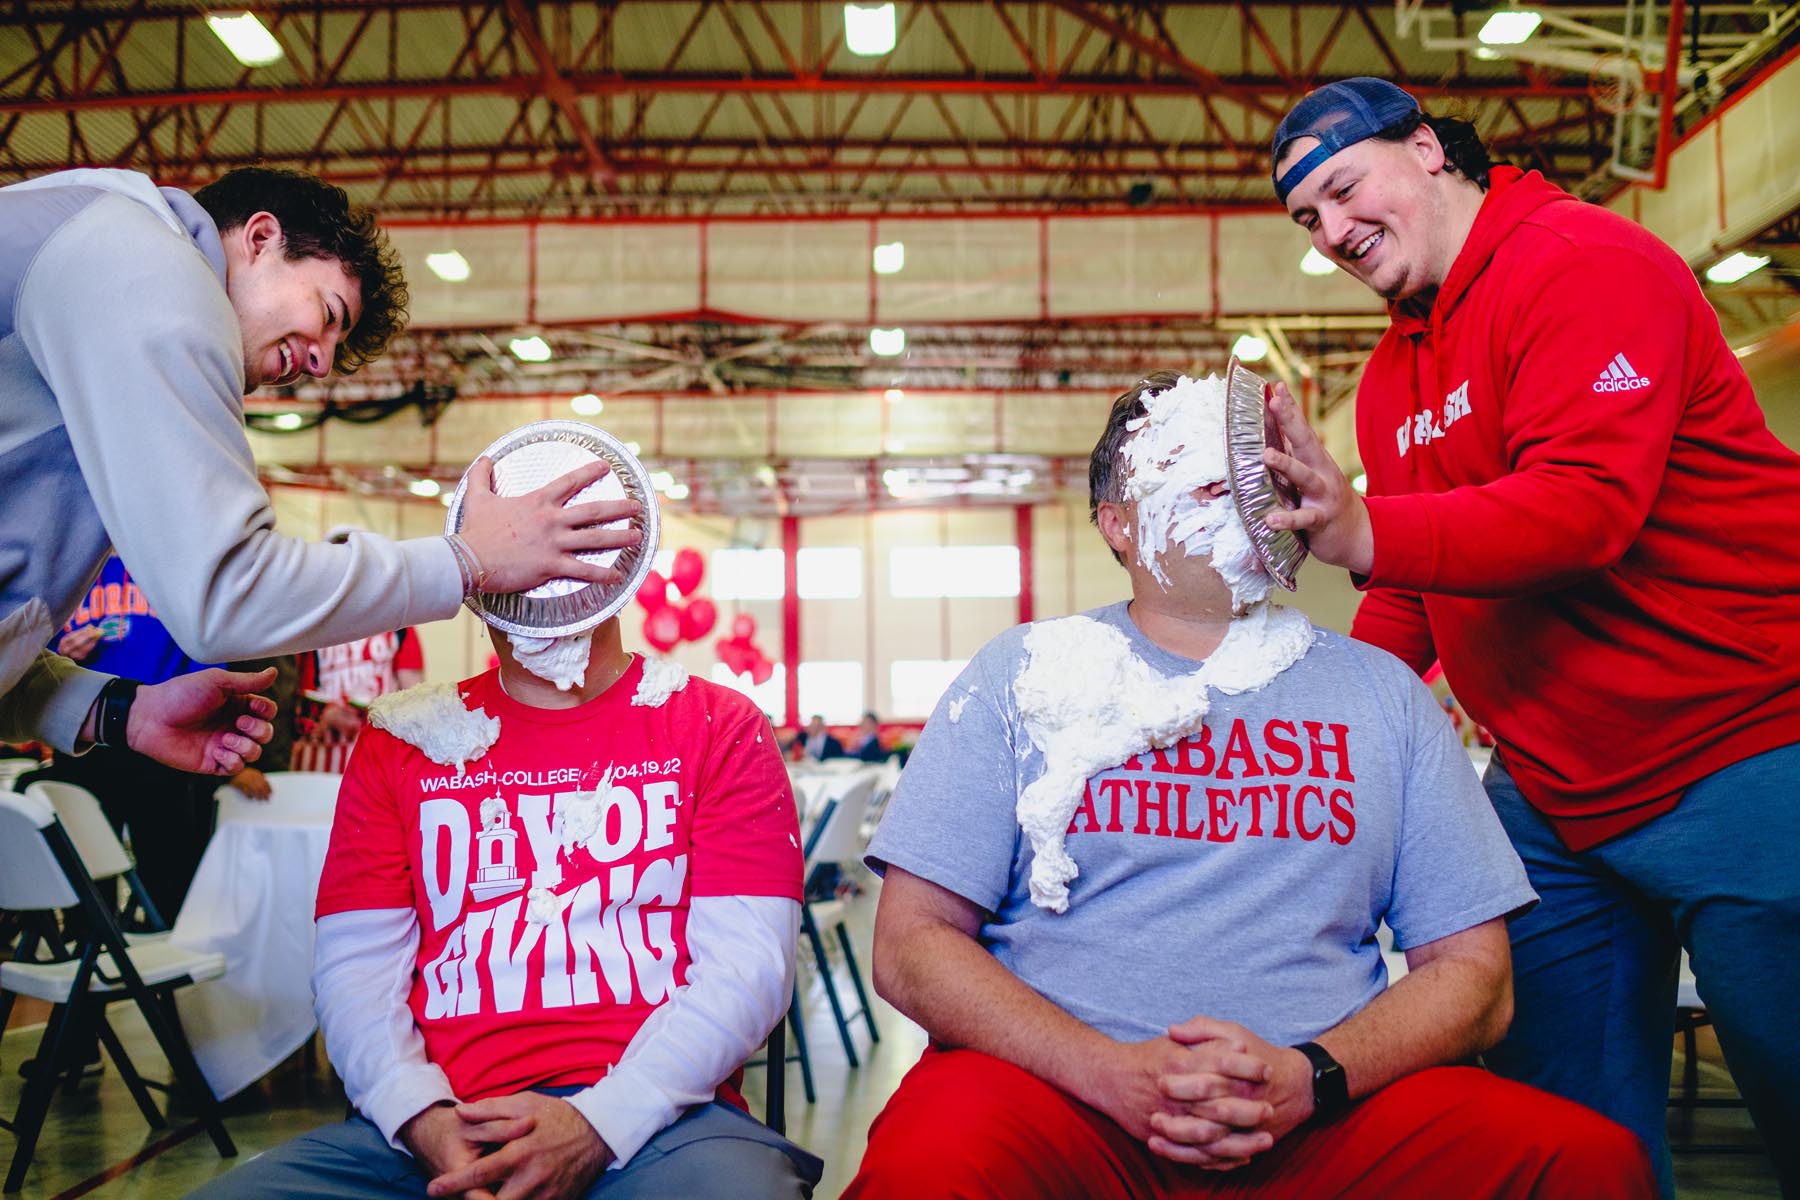 Head Basketball Coach Kyle Brumett (left) and Assistant Football Coach Olmy Olmstead ’04 won the raffle to get a pie in the face to celebrate Day of Giving. 